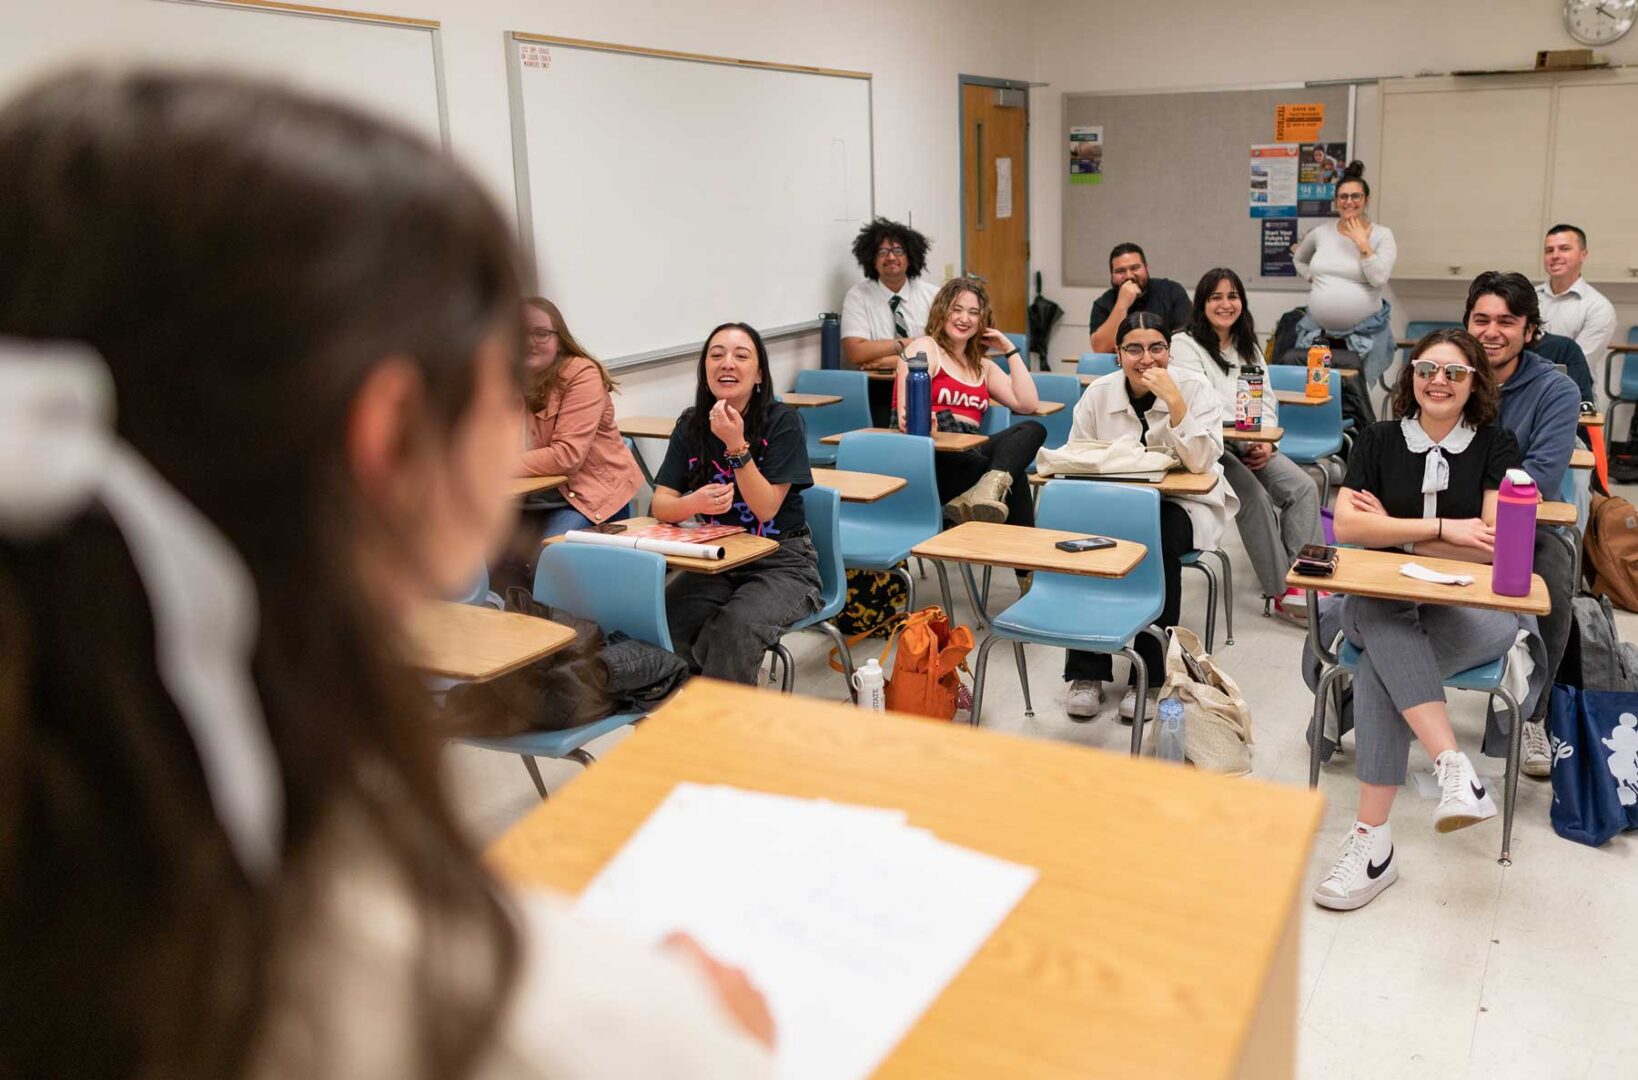 Students in a college class sit at individual desks listening to and smiling at another student.